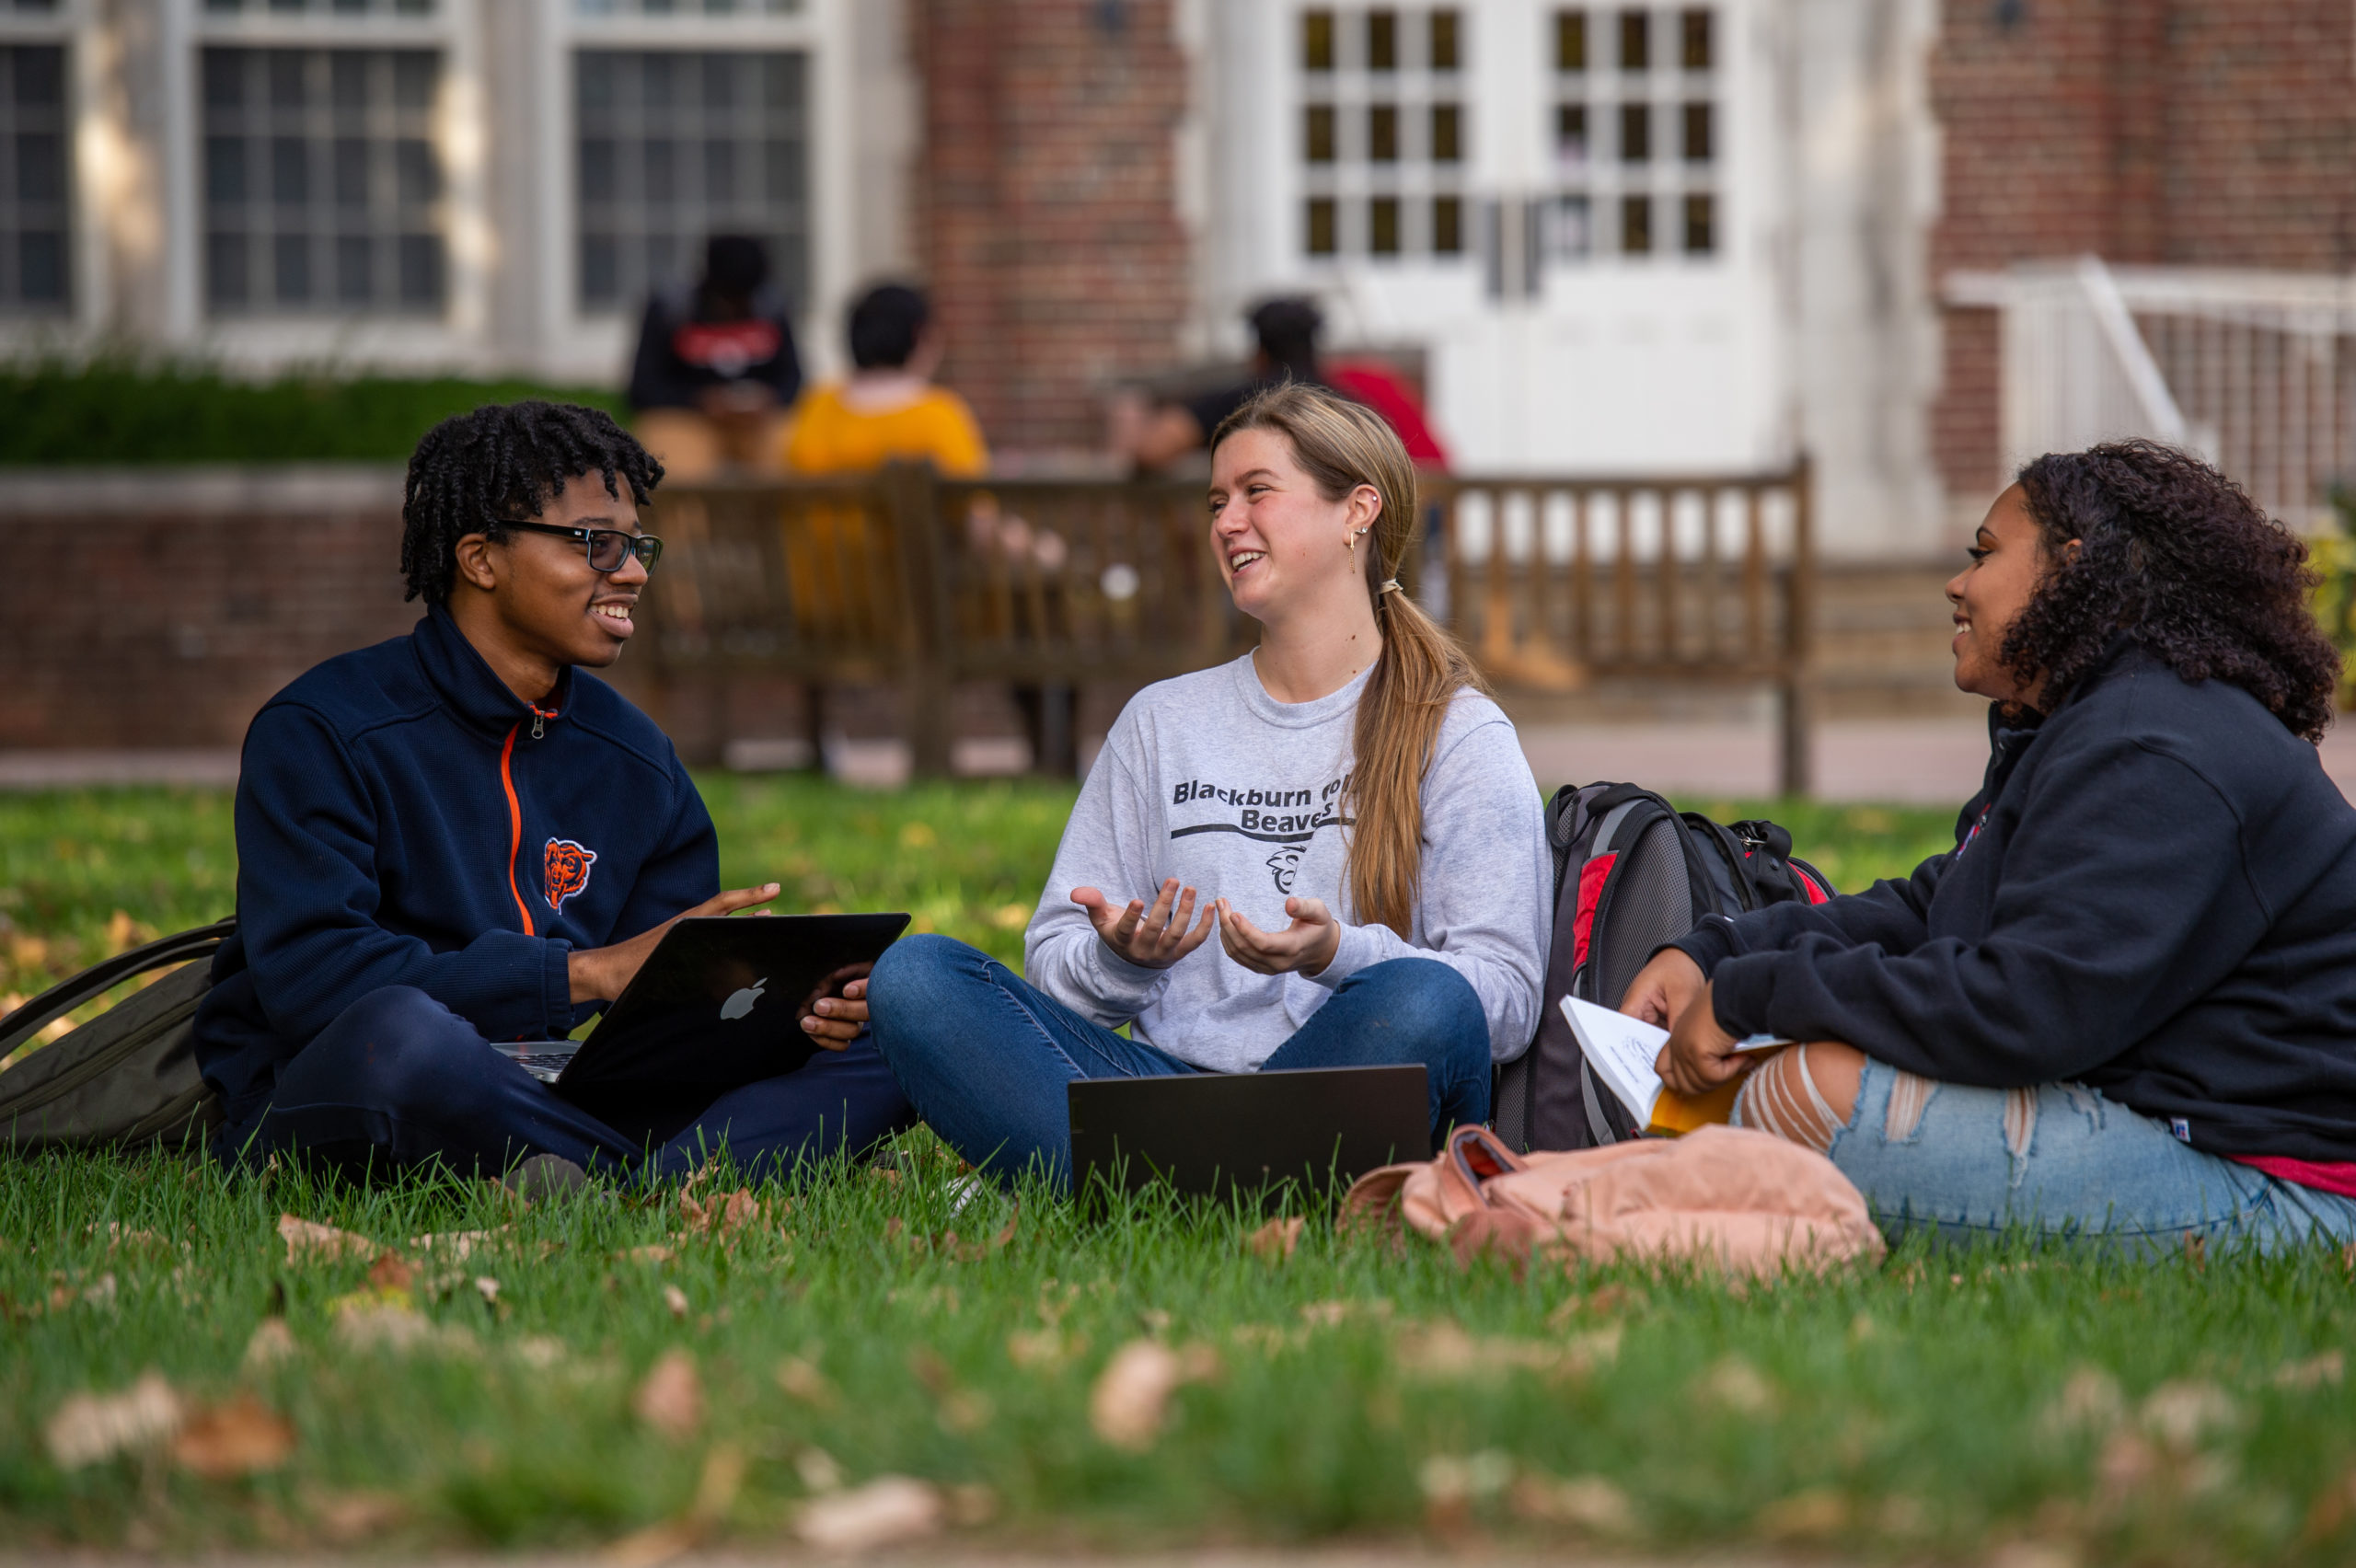 Three Blackburn students sitting and conversating on the grass near Hudson Hall's Quad. A group of students can be seen sitting at a bench in the background.